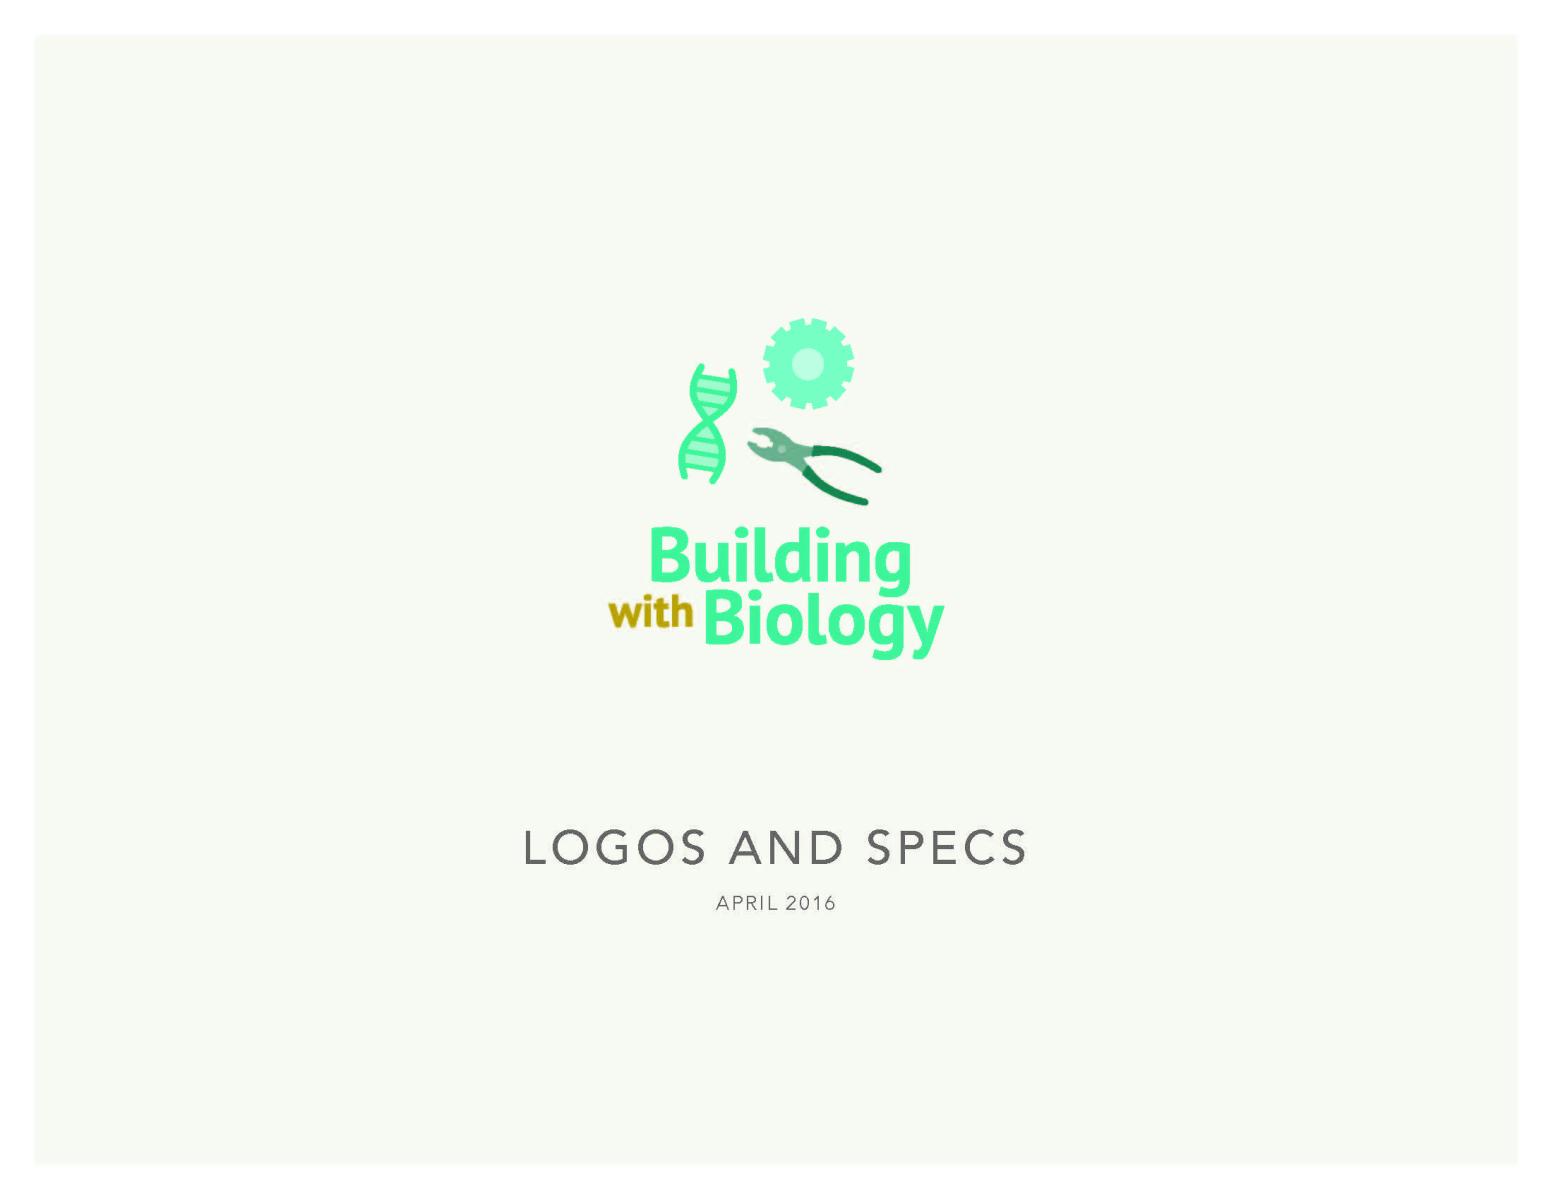 Building with Biology logo and specifications cover sheet